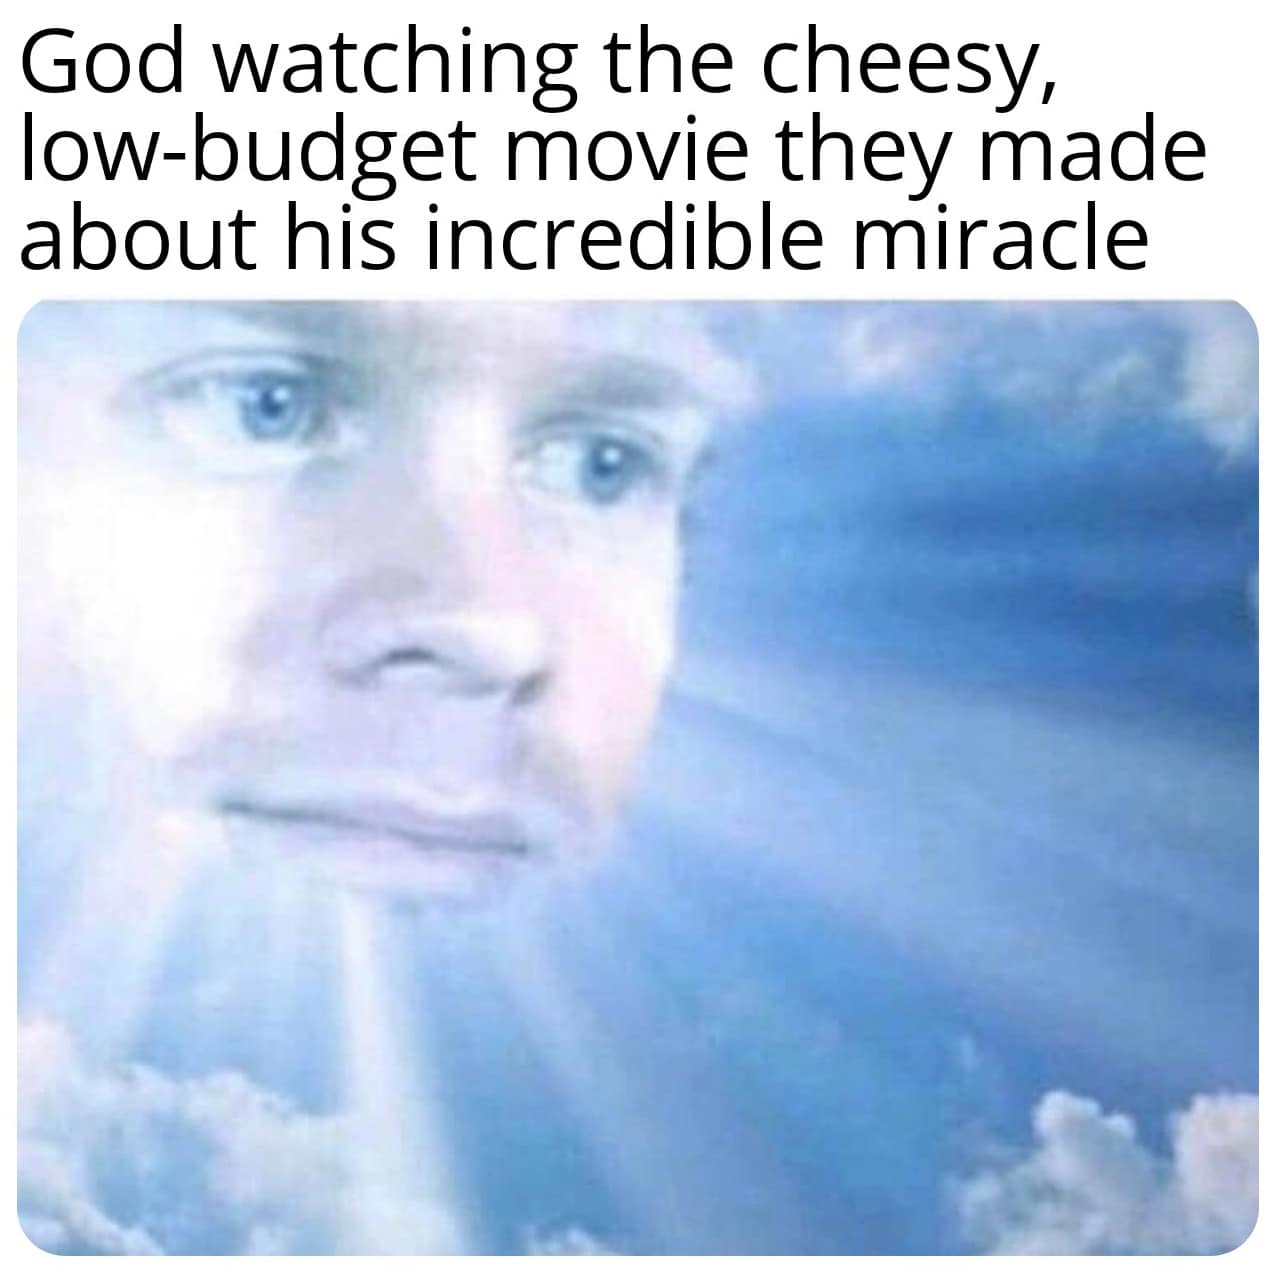 christian christian-memes christian text: God watching the cheesy, low-budget movie they made about his incredible miracle 